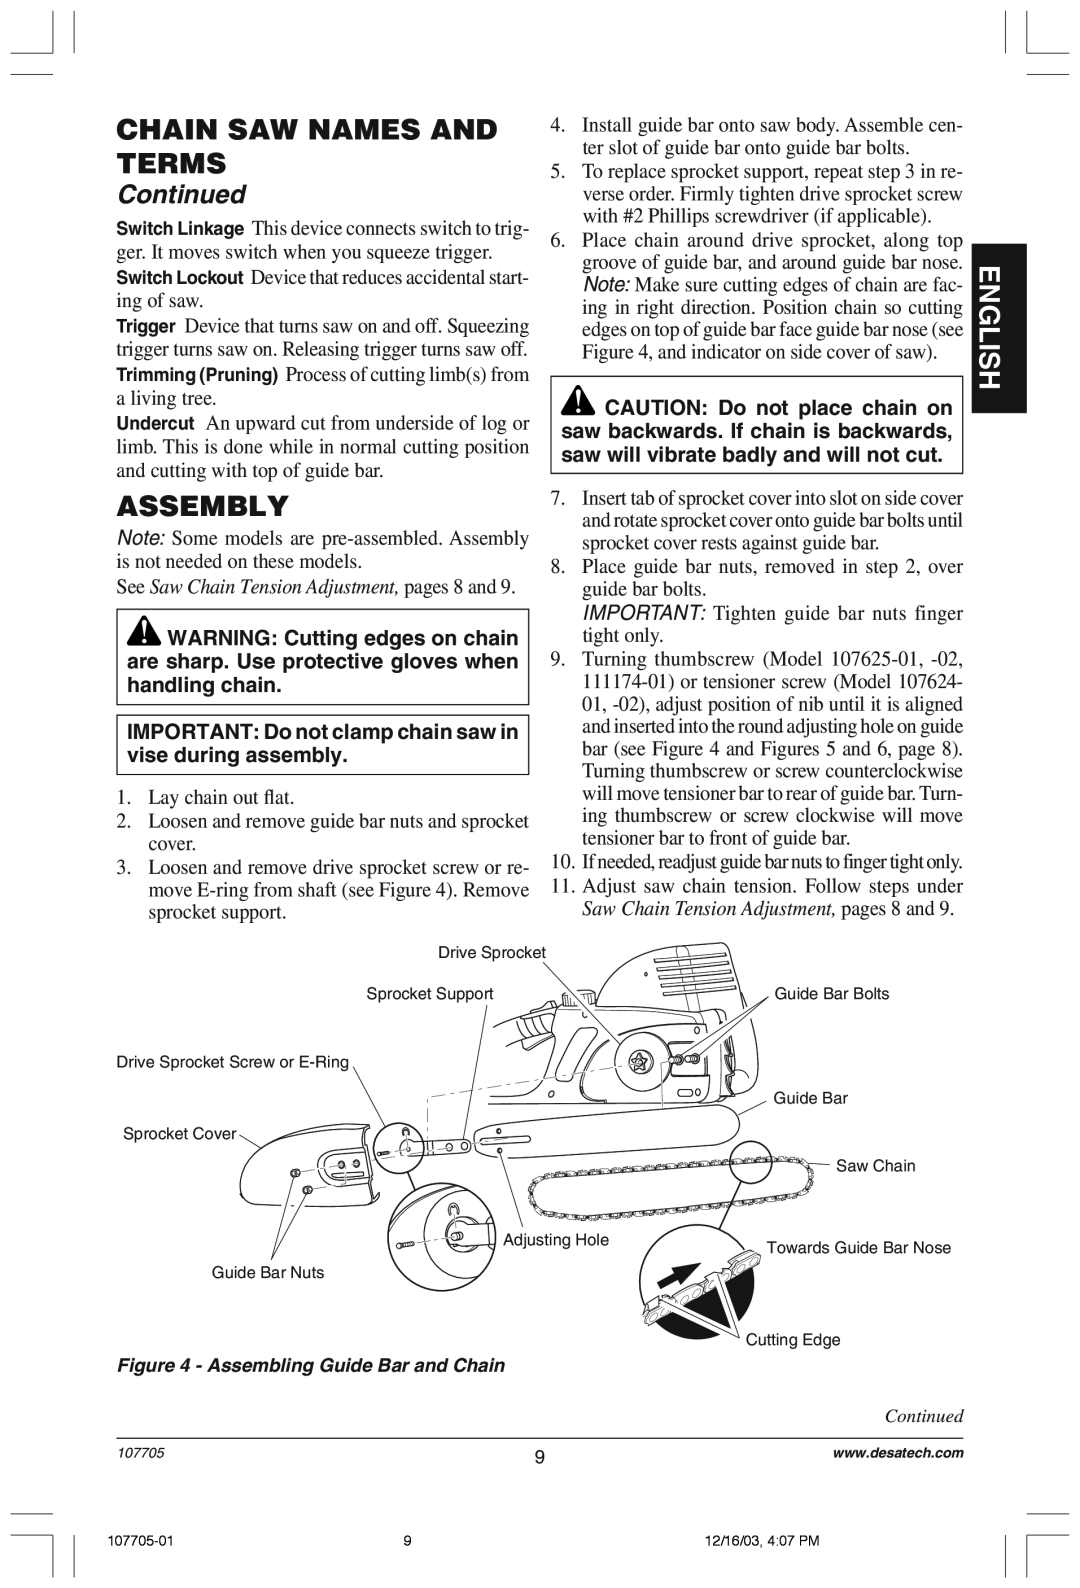 Desa 107624-01 Assembly, Chain Saw Names And Terms, English, Continued, See Saw Chain Tension Adjustment, pages 8 and 